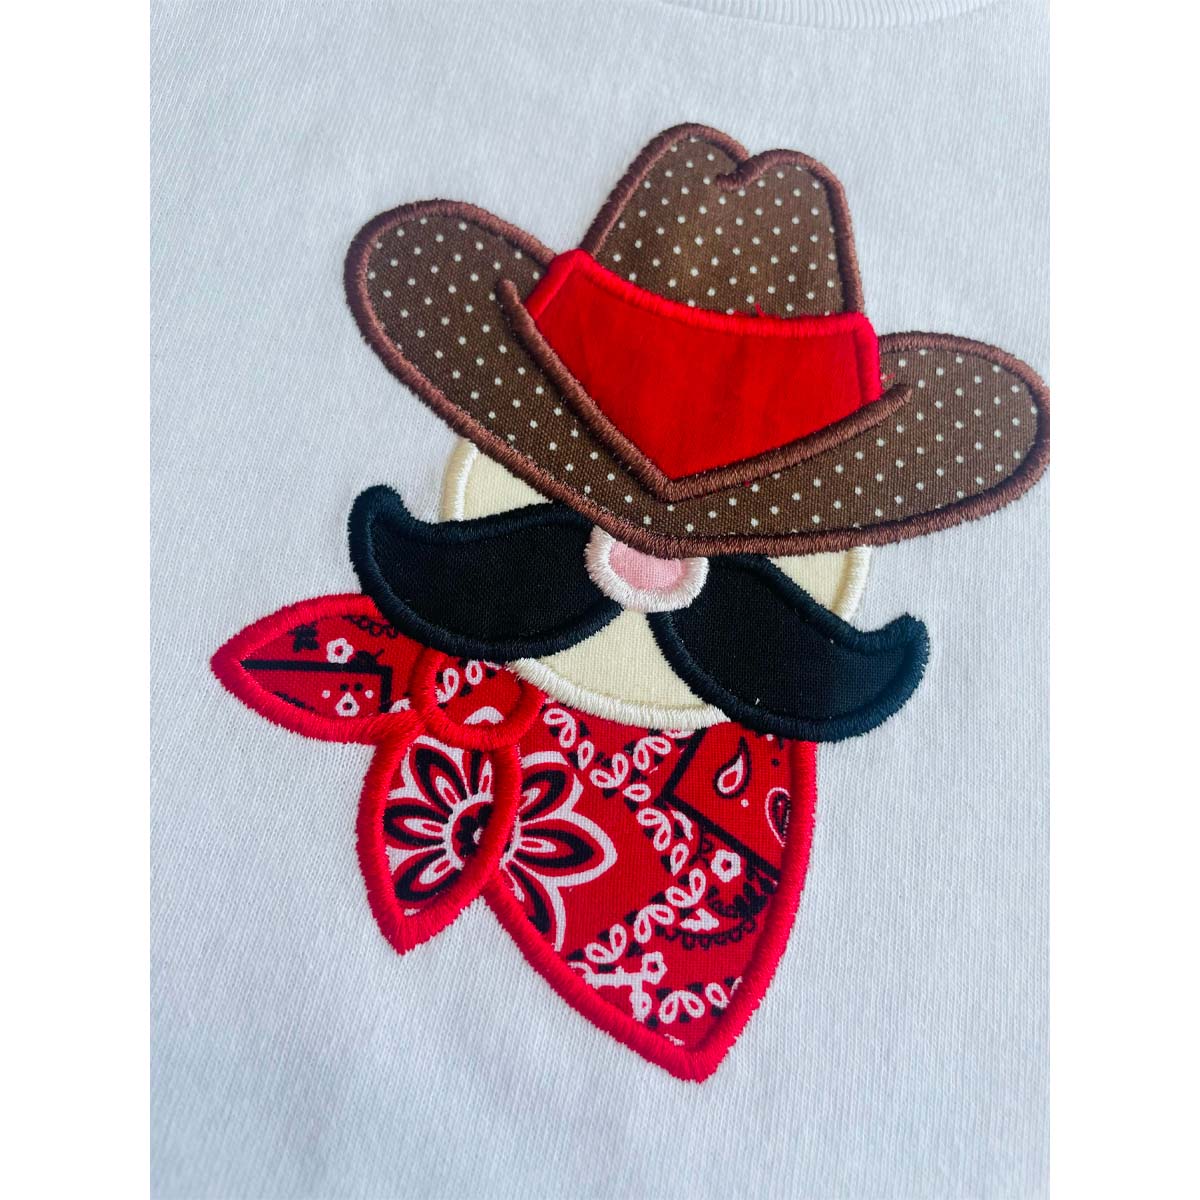 Saddle Up Cowboy Tee - Southern Grace Creations